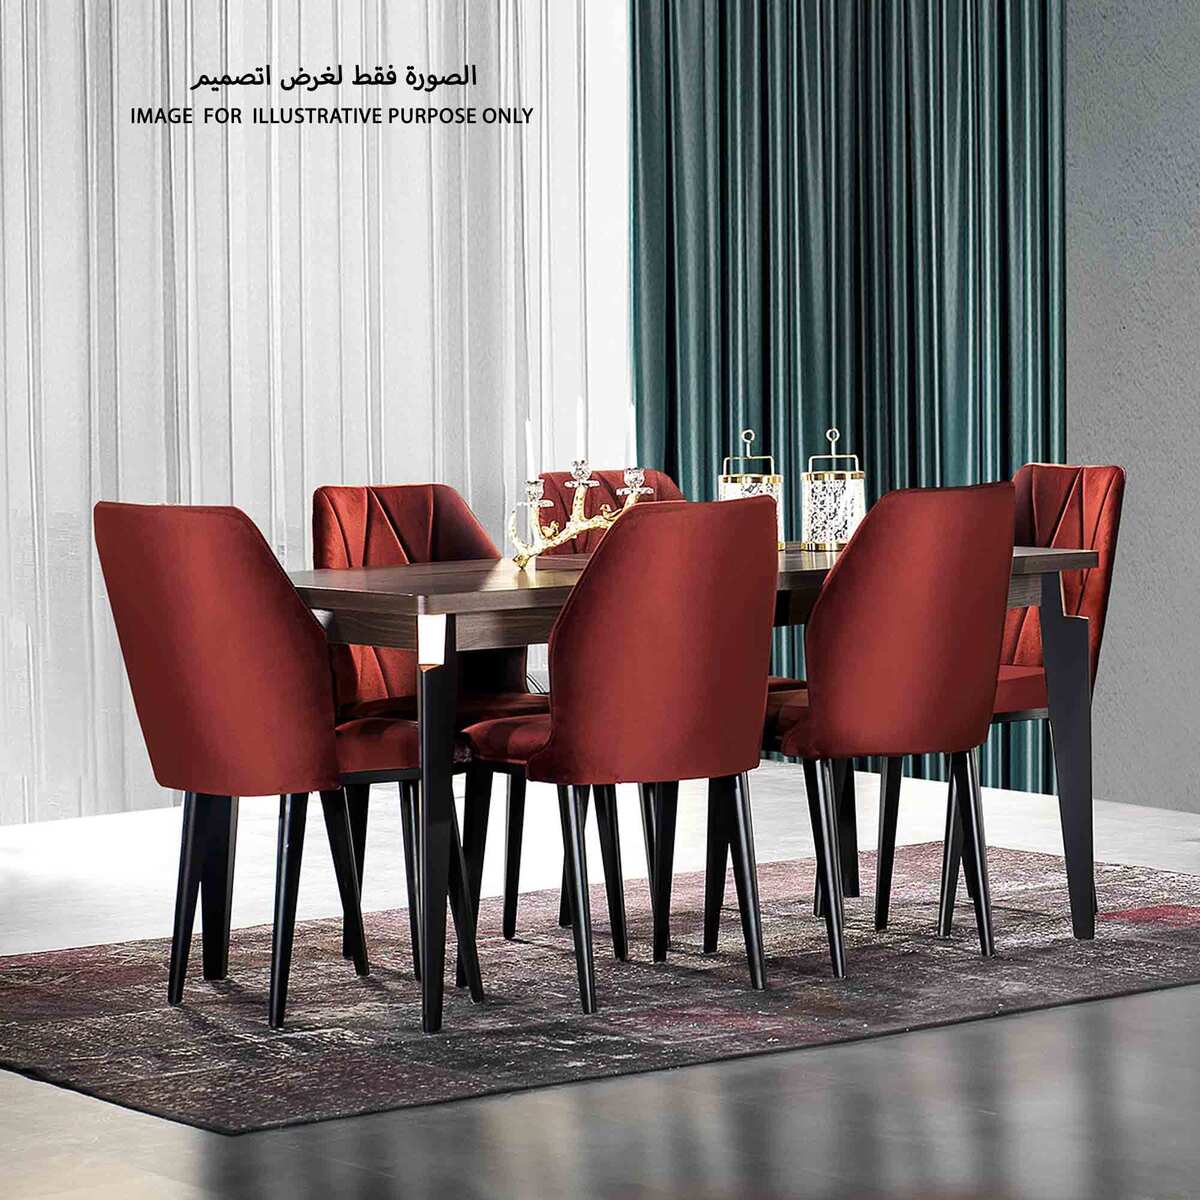 DOLCE Extendable Dining Table+6 Chair .Size Table:80x90x160-200(HxWxL).Size Chair:96x52x46(HxWxD)